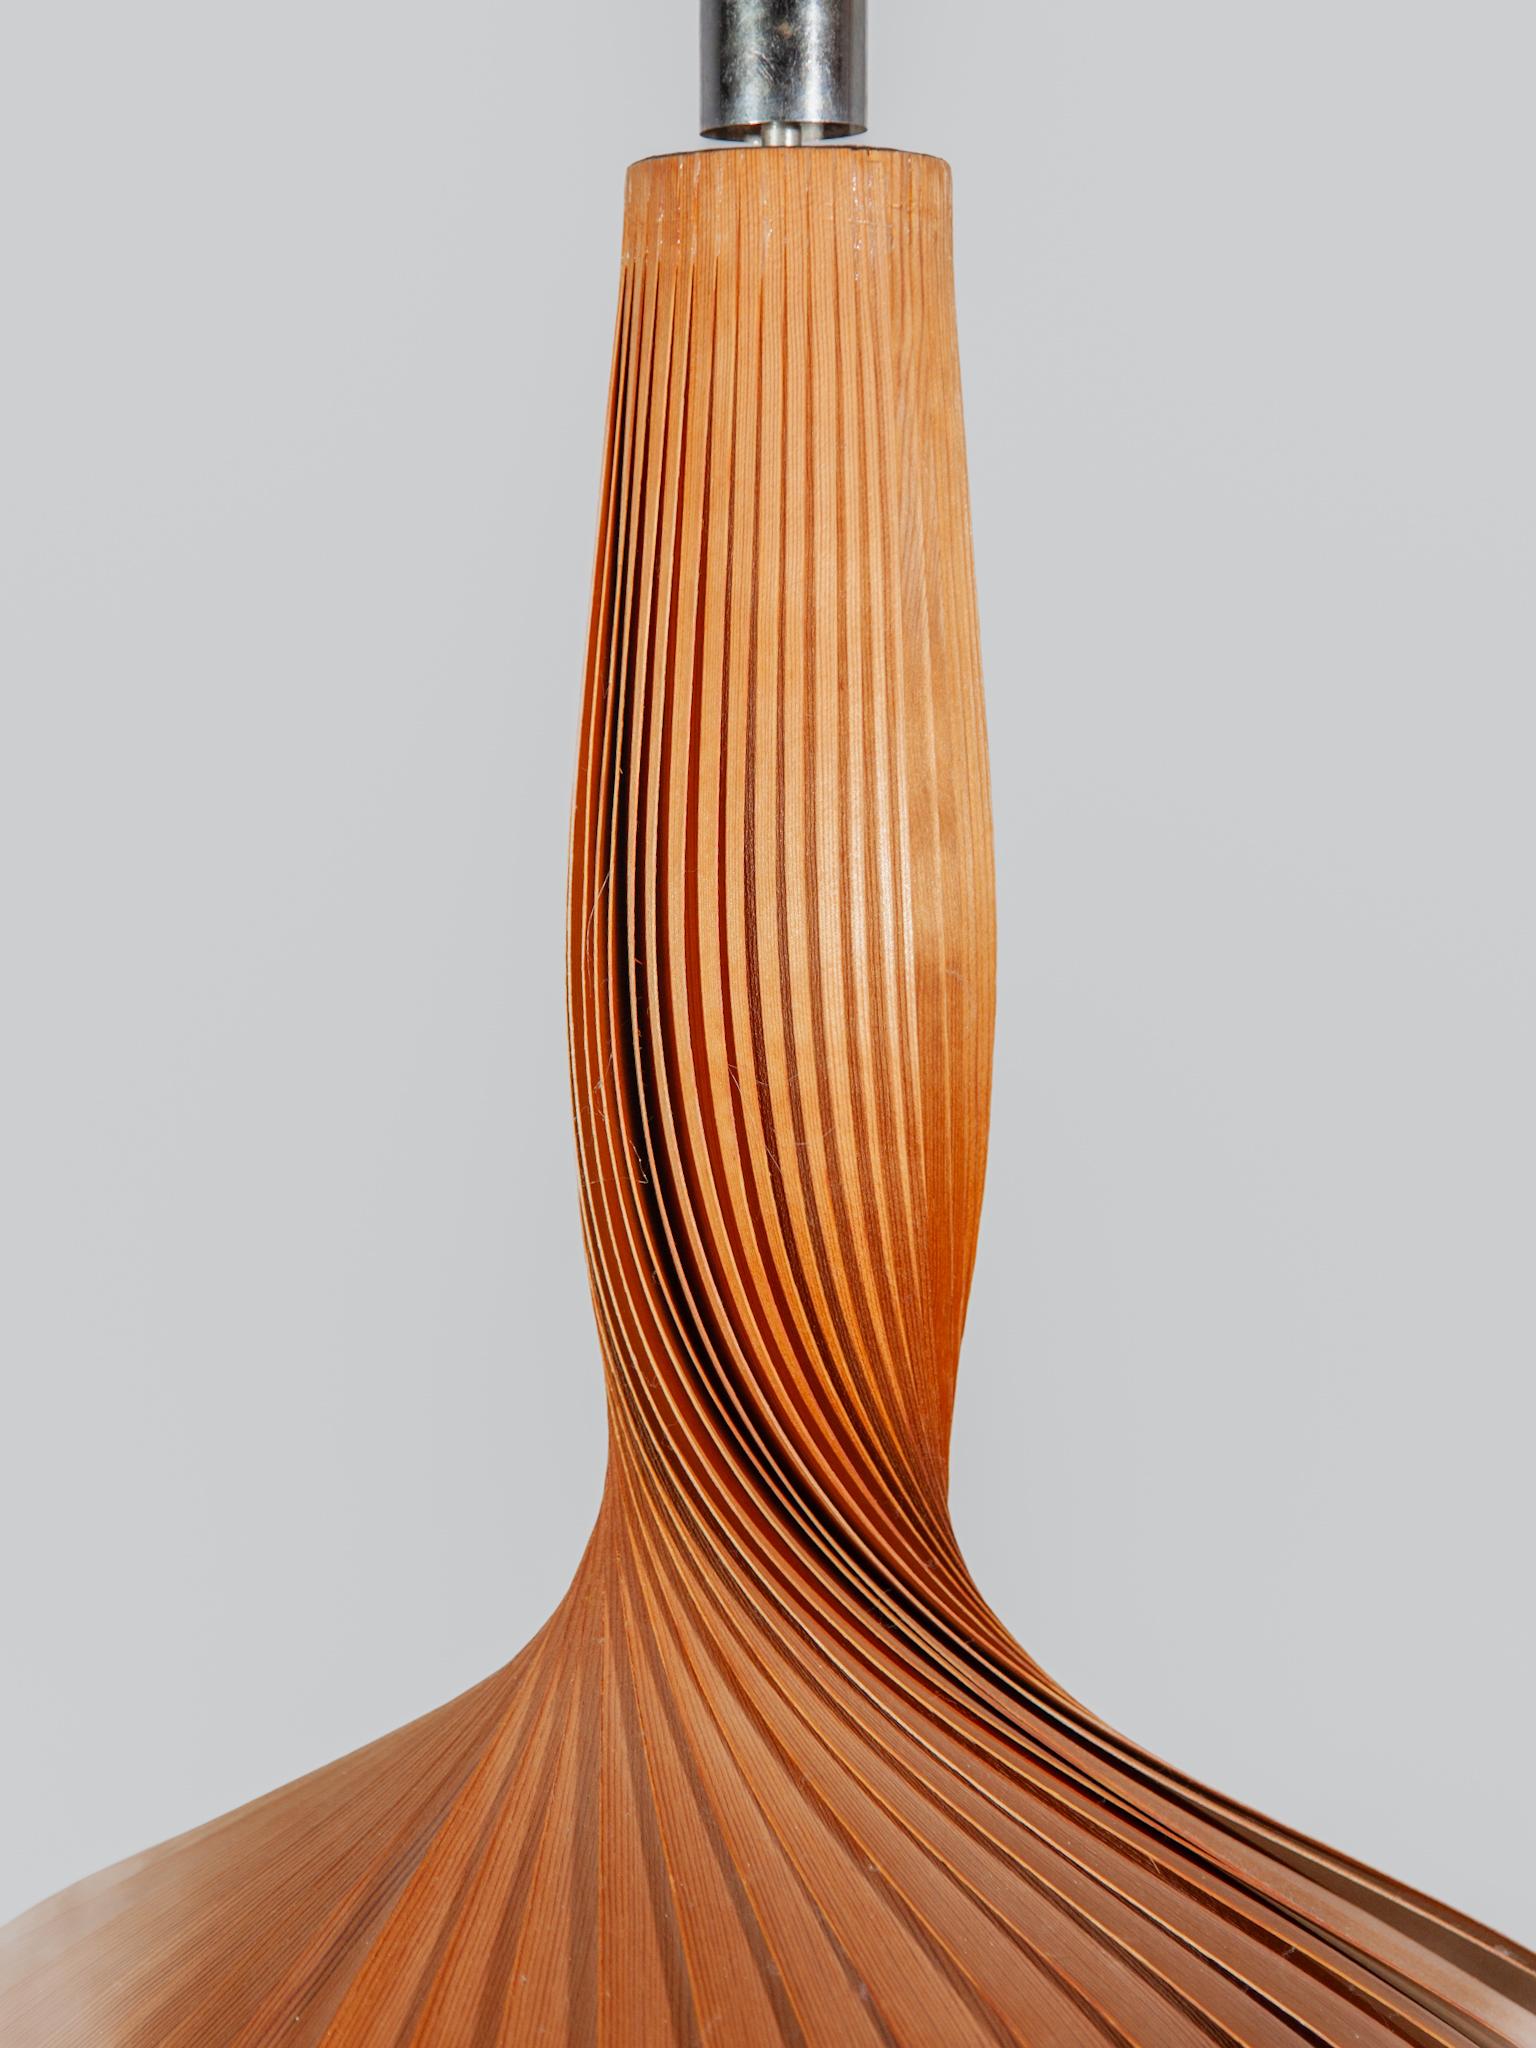 Mid-20th Century Natural Wooden Lamp by Hans-Agne Jakobsson for AB Ellysett Markaryd, Sweden. For Sale